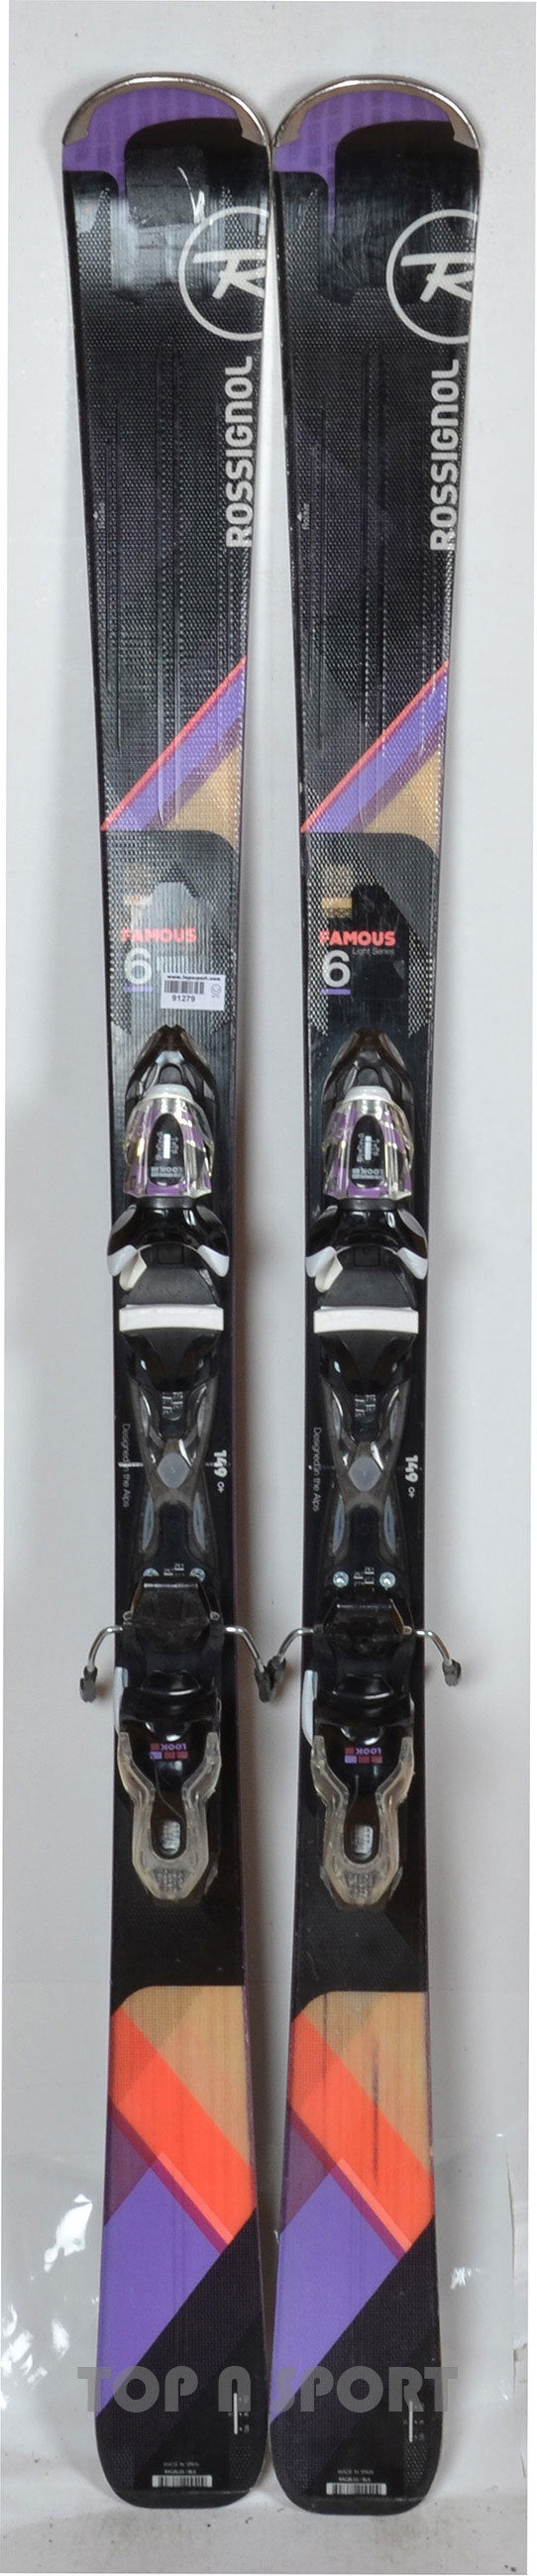 Rossignol FAMOUS 6 - skis d'occasion Femme